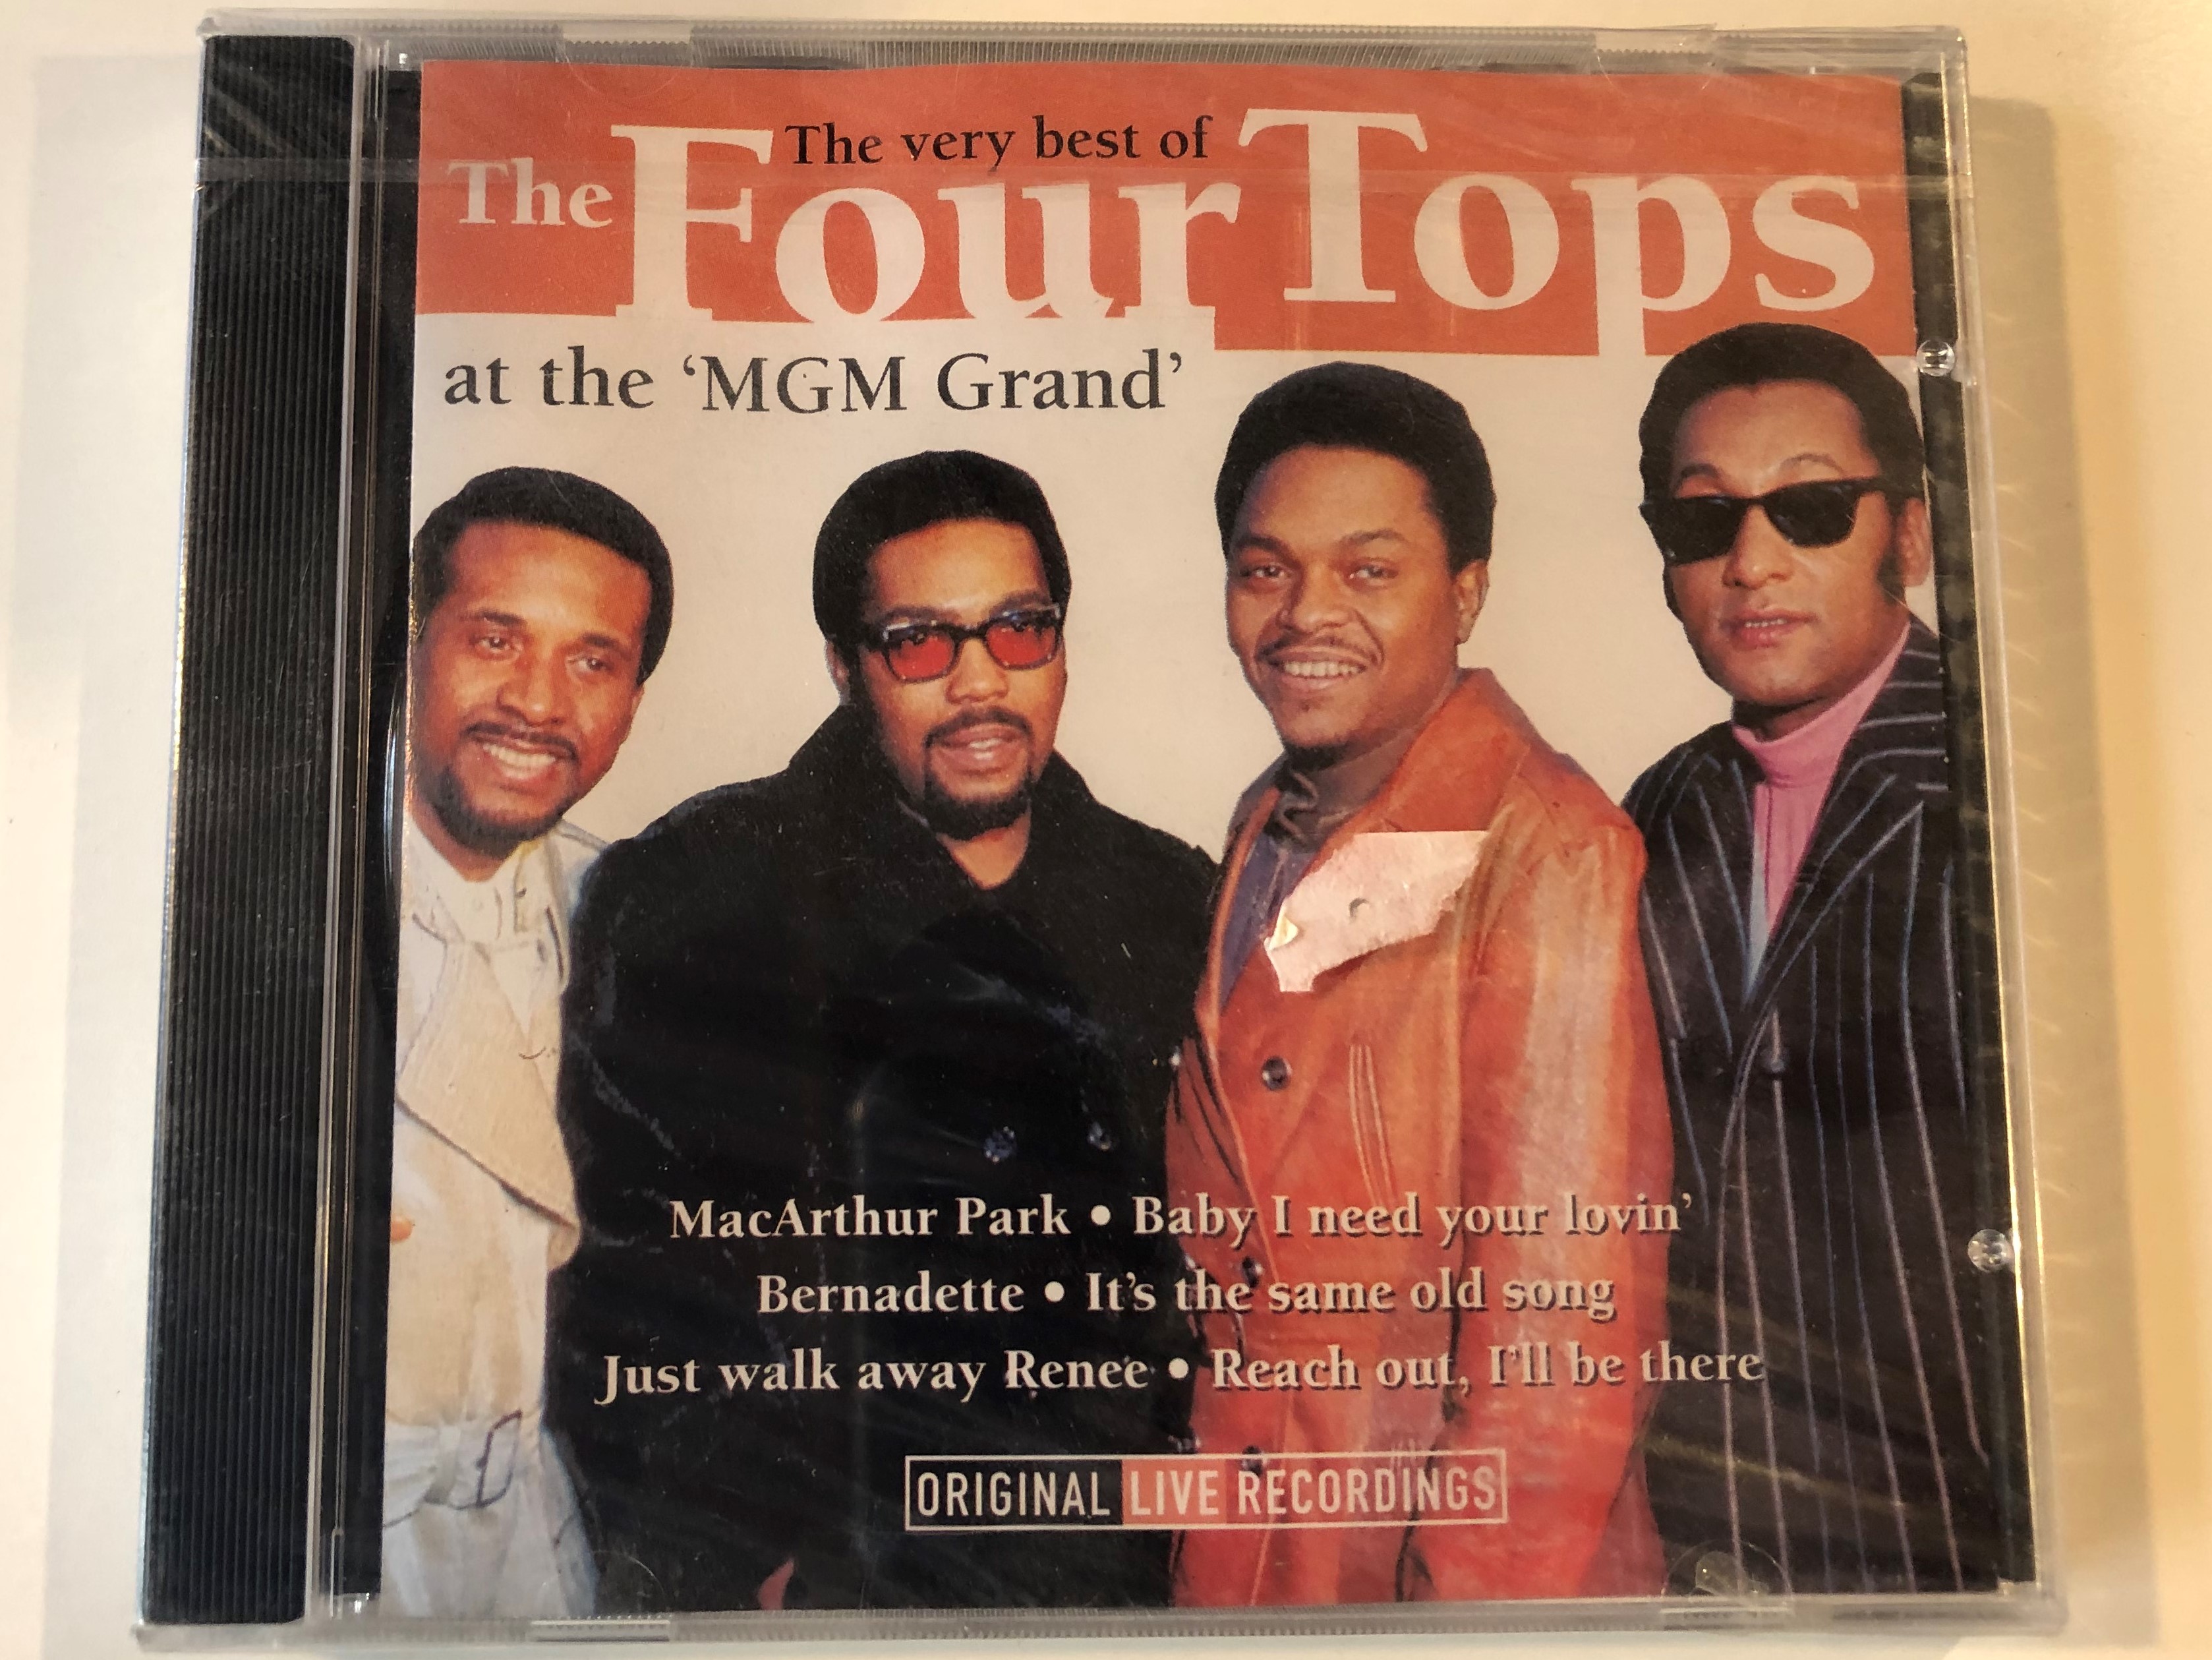 the-very-best-of-the-four-tops-at-the-mgm-grand-macarthur-park-baby-i-need-your-lovin-bernadette-it-s-the-same-old-song-just-walk-away-renee-reach-out-i-ll-be-there-original-live-record-1-.jpg